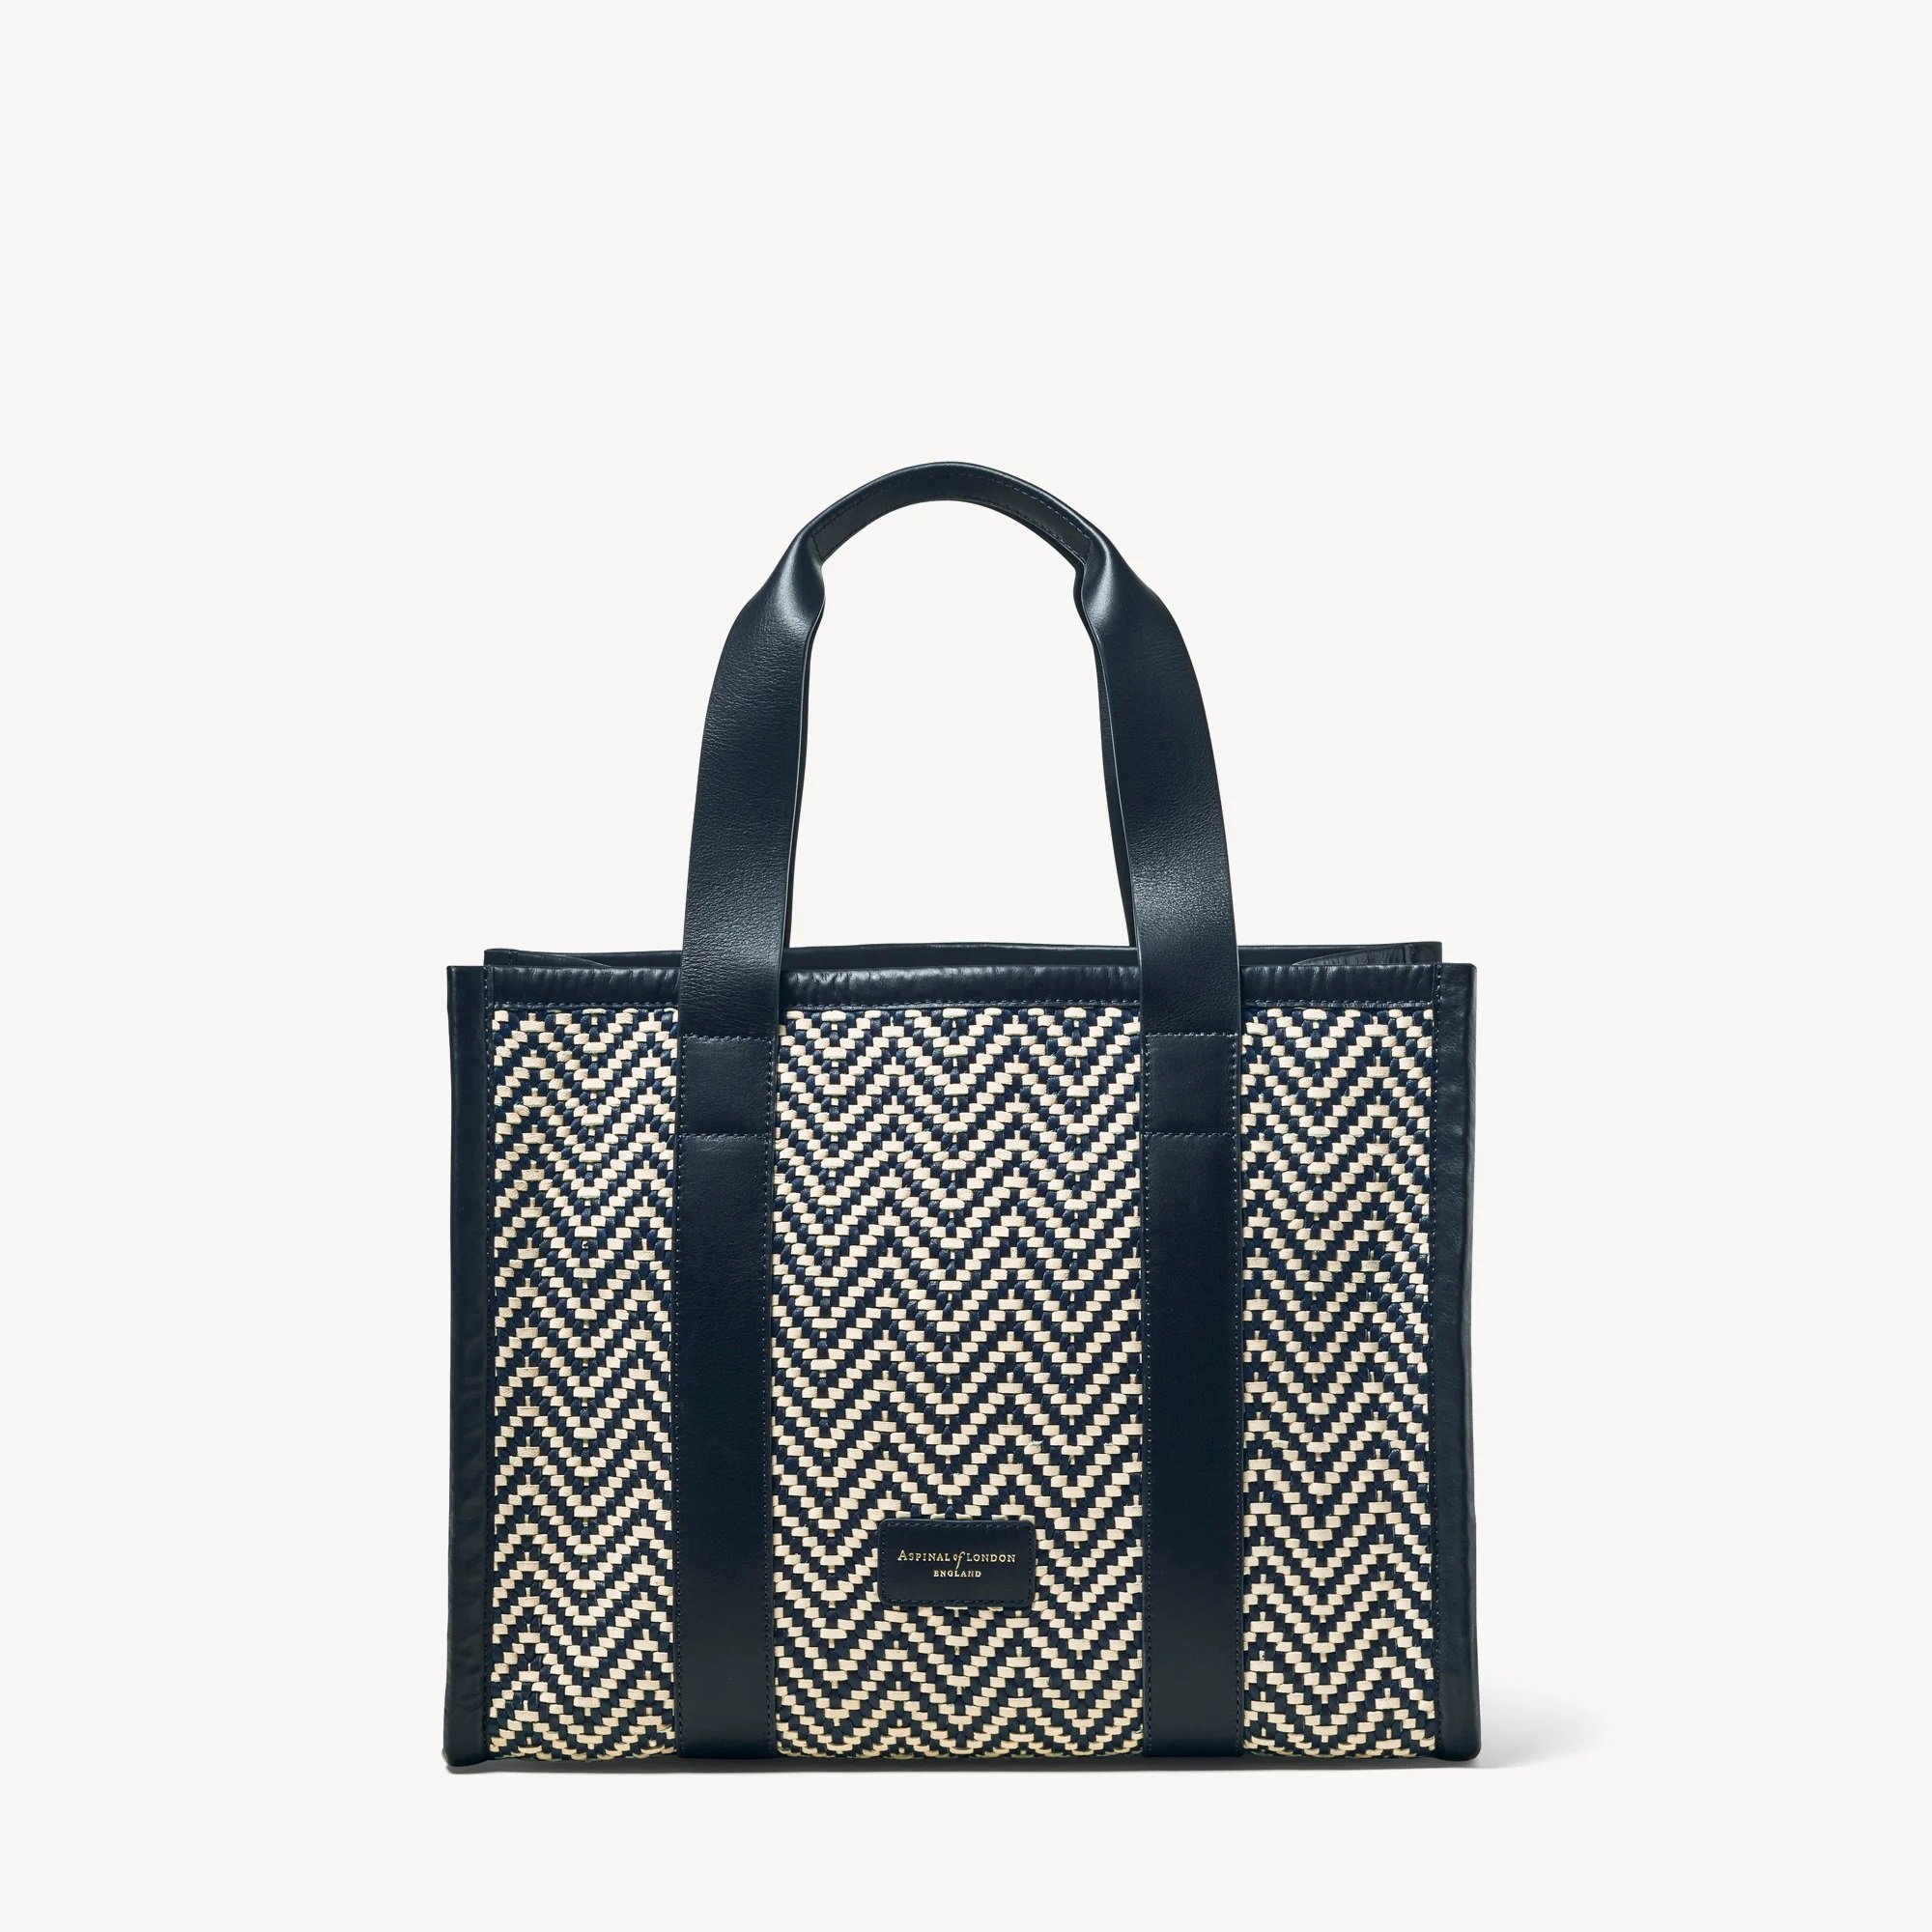 Aspinal of London Small Henley Tote in Navy & Ivory Chevron Woven Leather.jpg